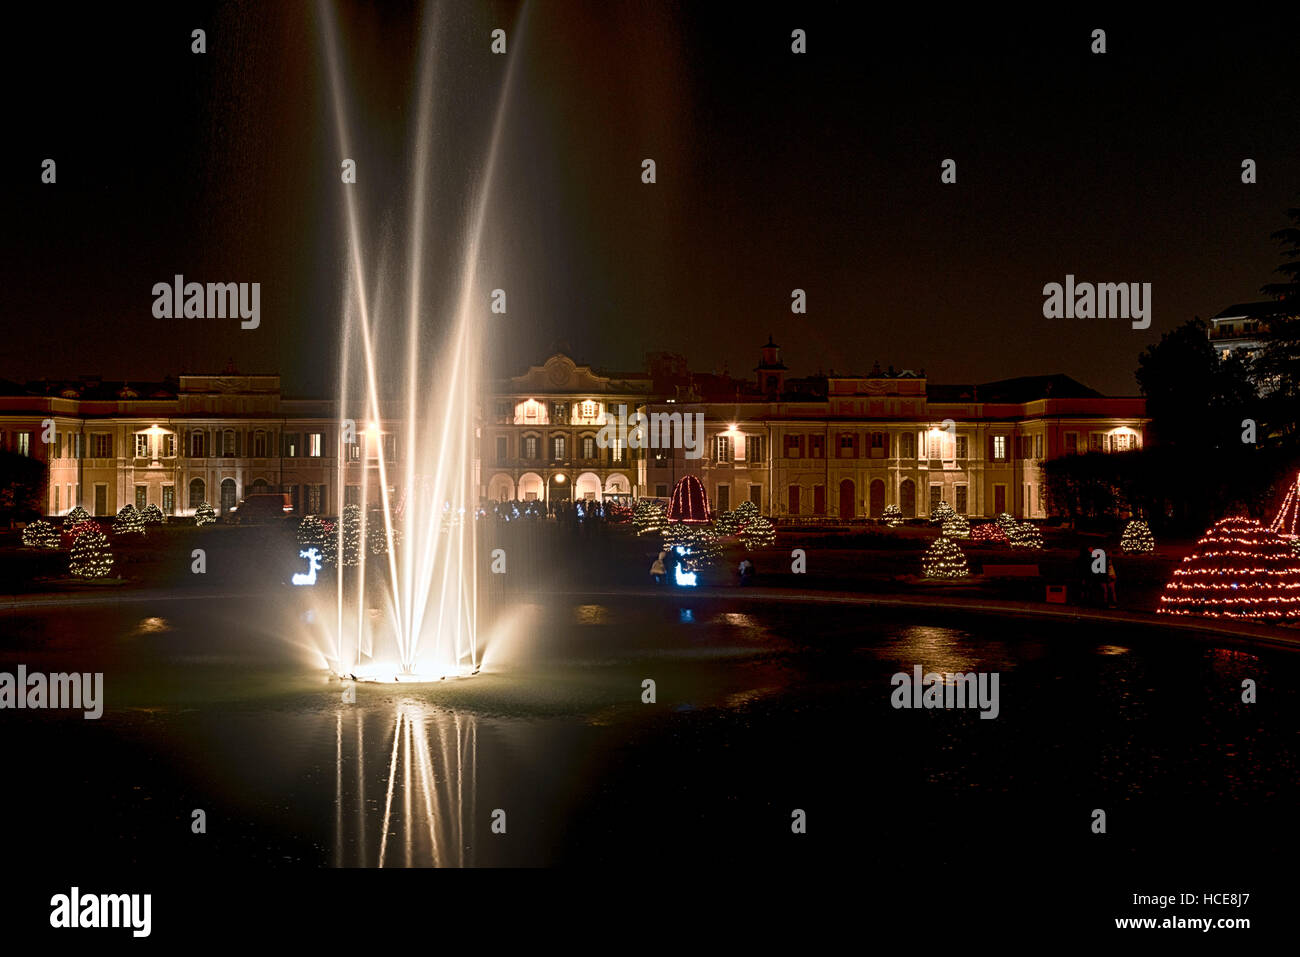 Fountain in the foreground and Christmas lights in the public gardens of Varese Stock Photo